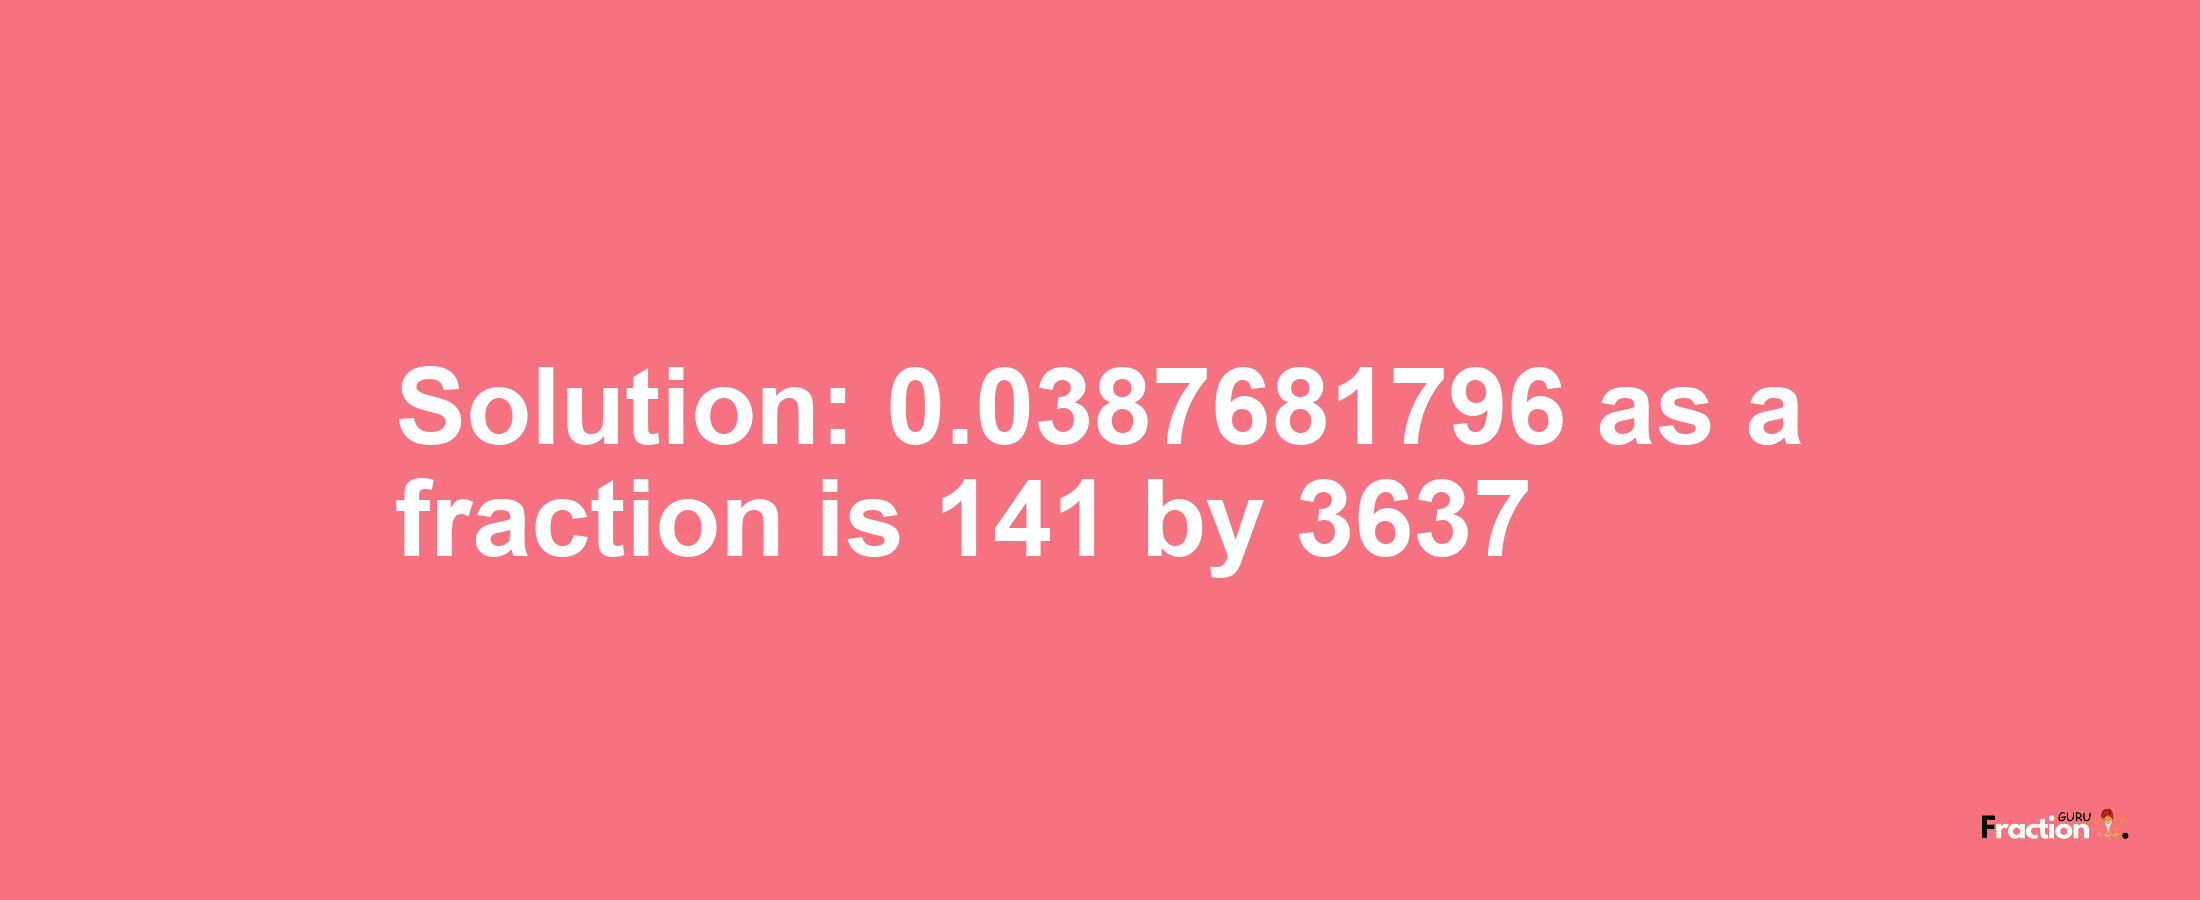 Solution:0.0387681796 as a fraction is 141/3637